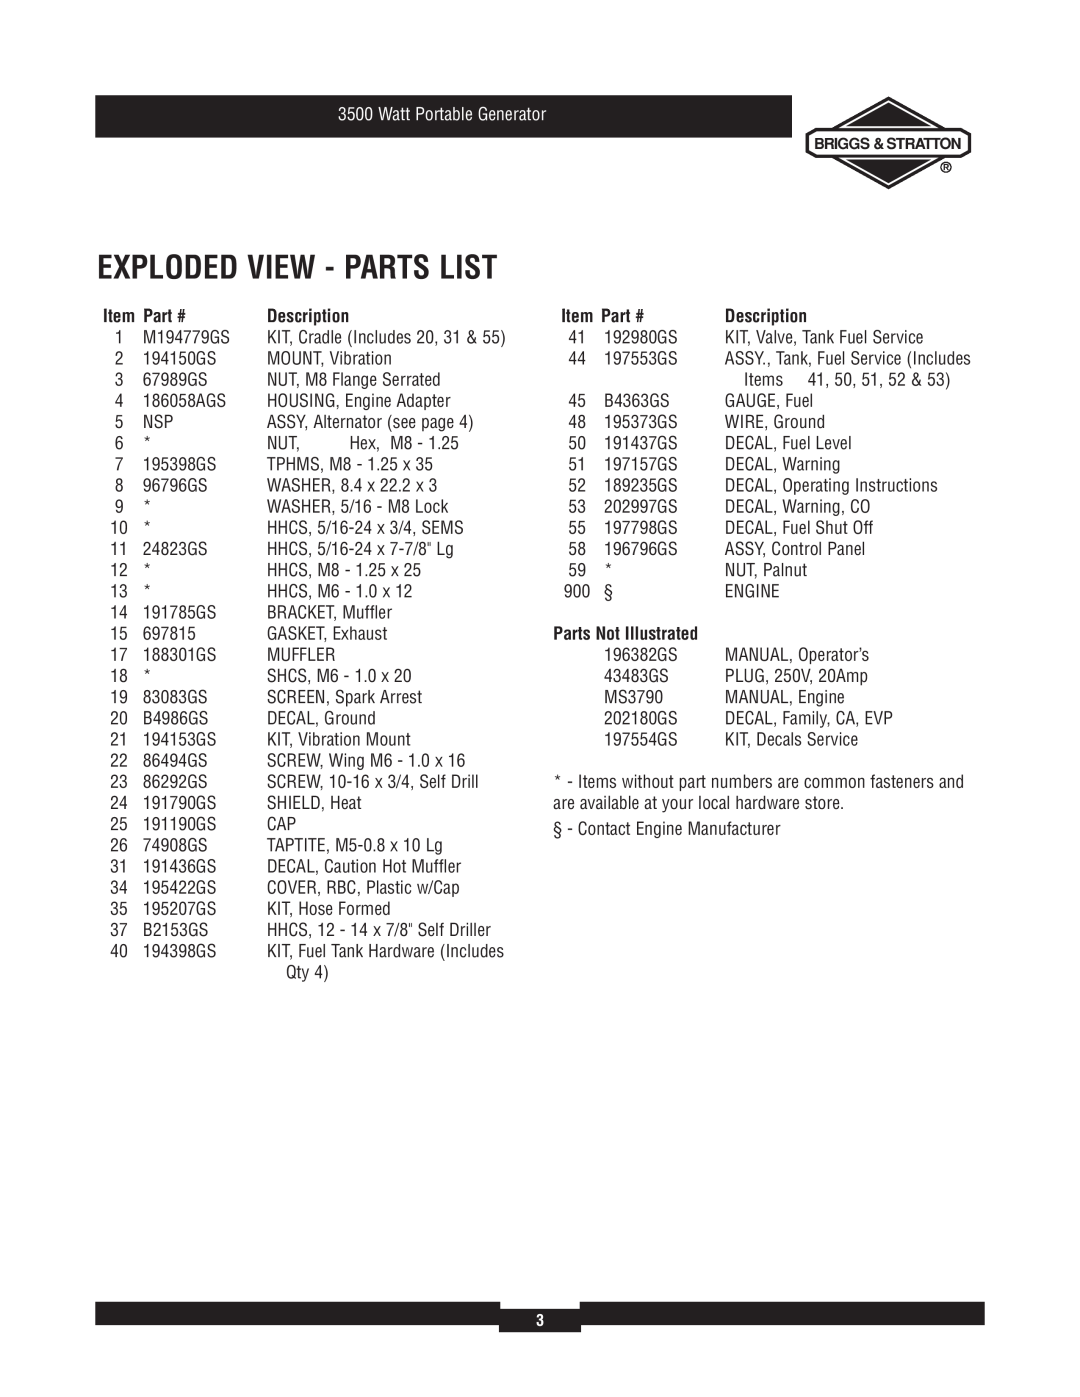 Briggs & Stratton 30218 manual Exploded View - Parts List, Item Part #, Description, Parts Not Illustrated 